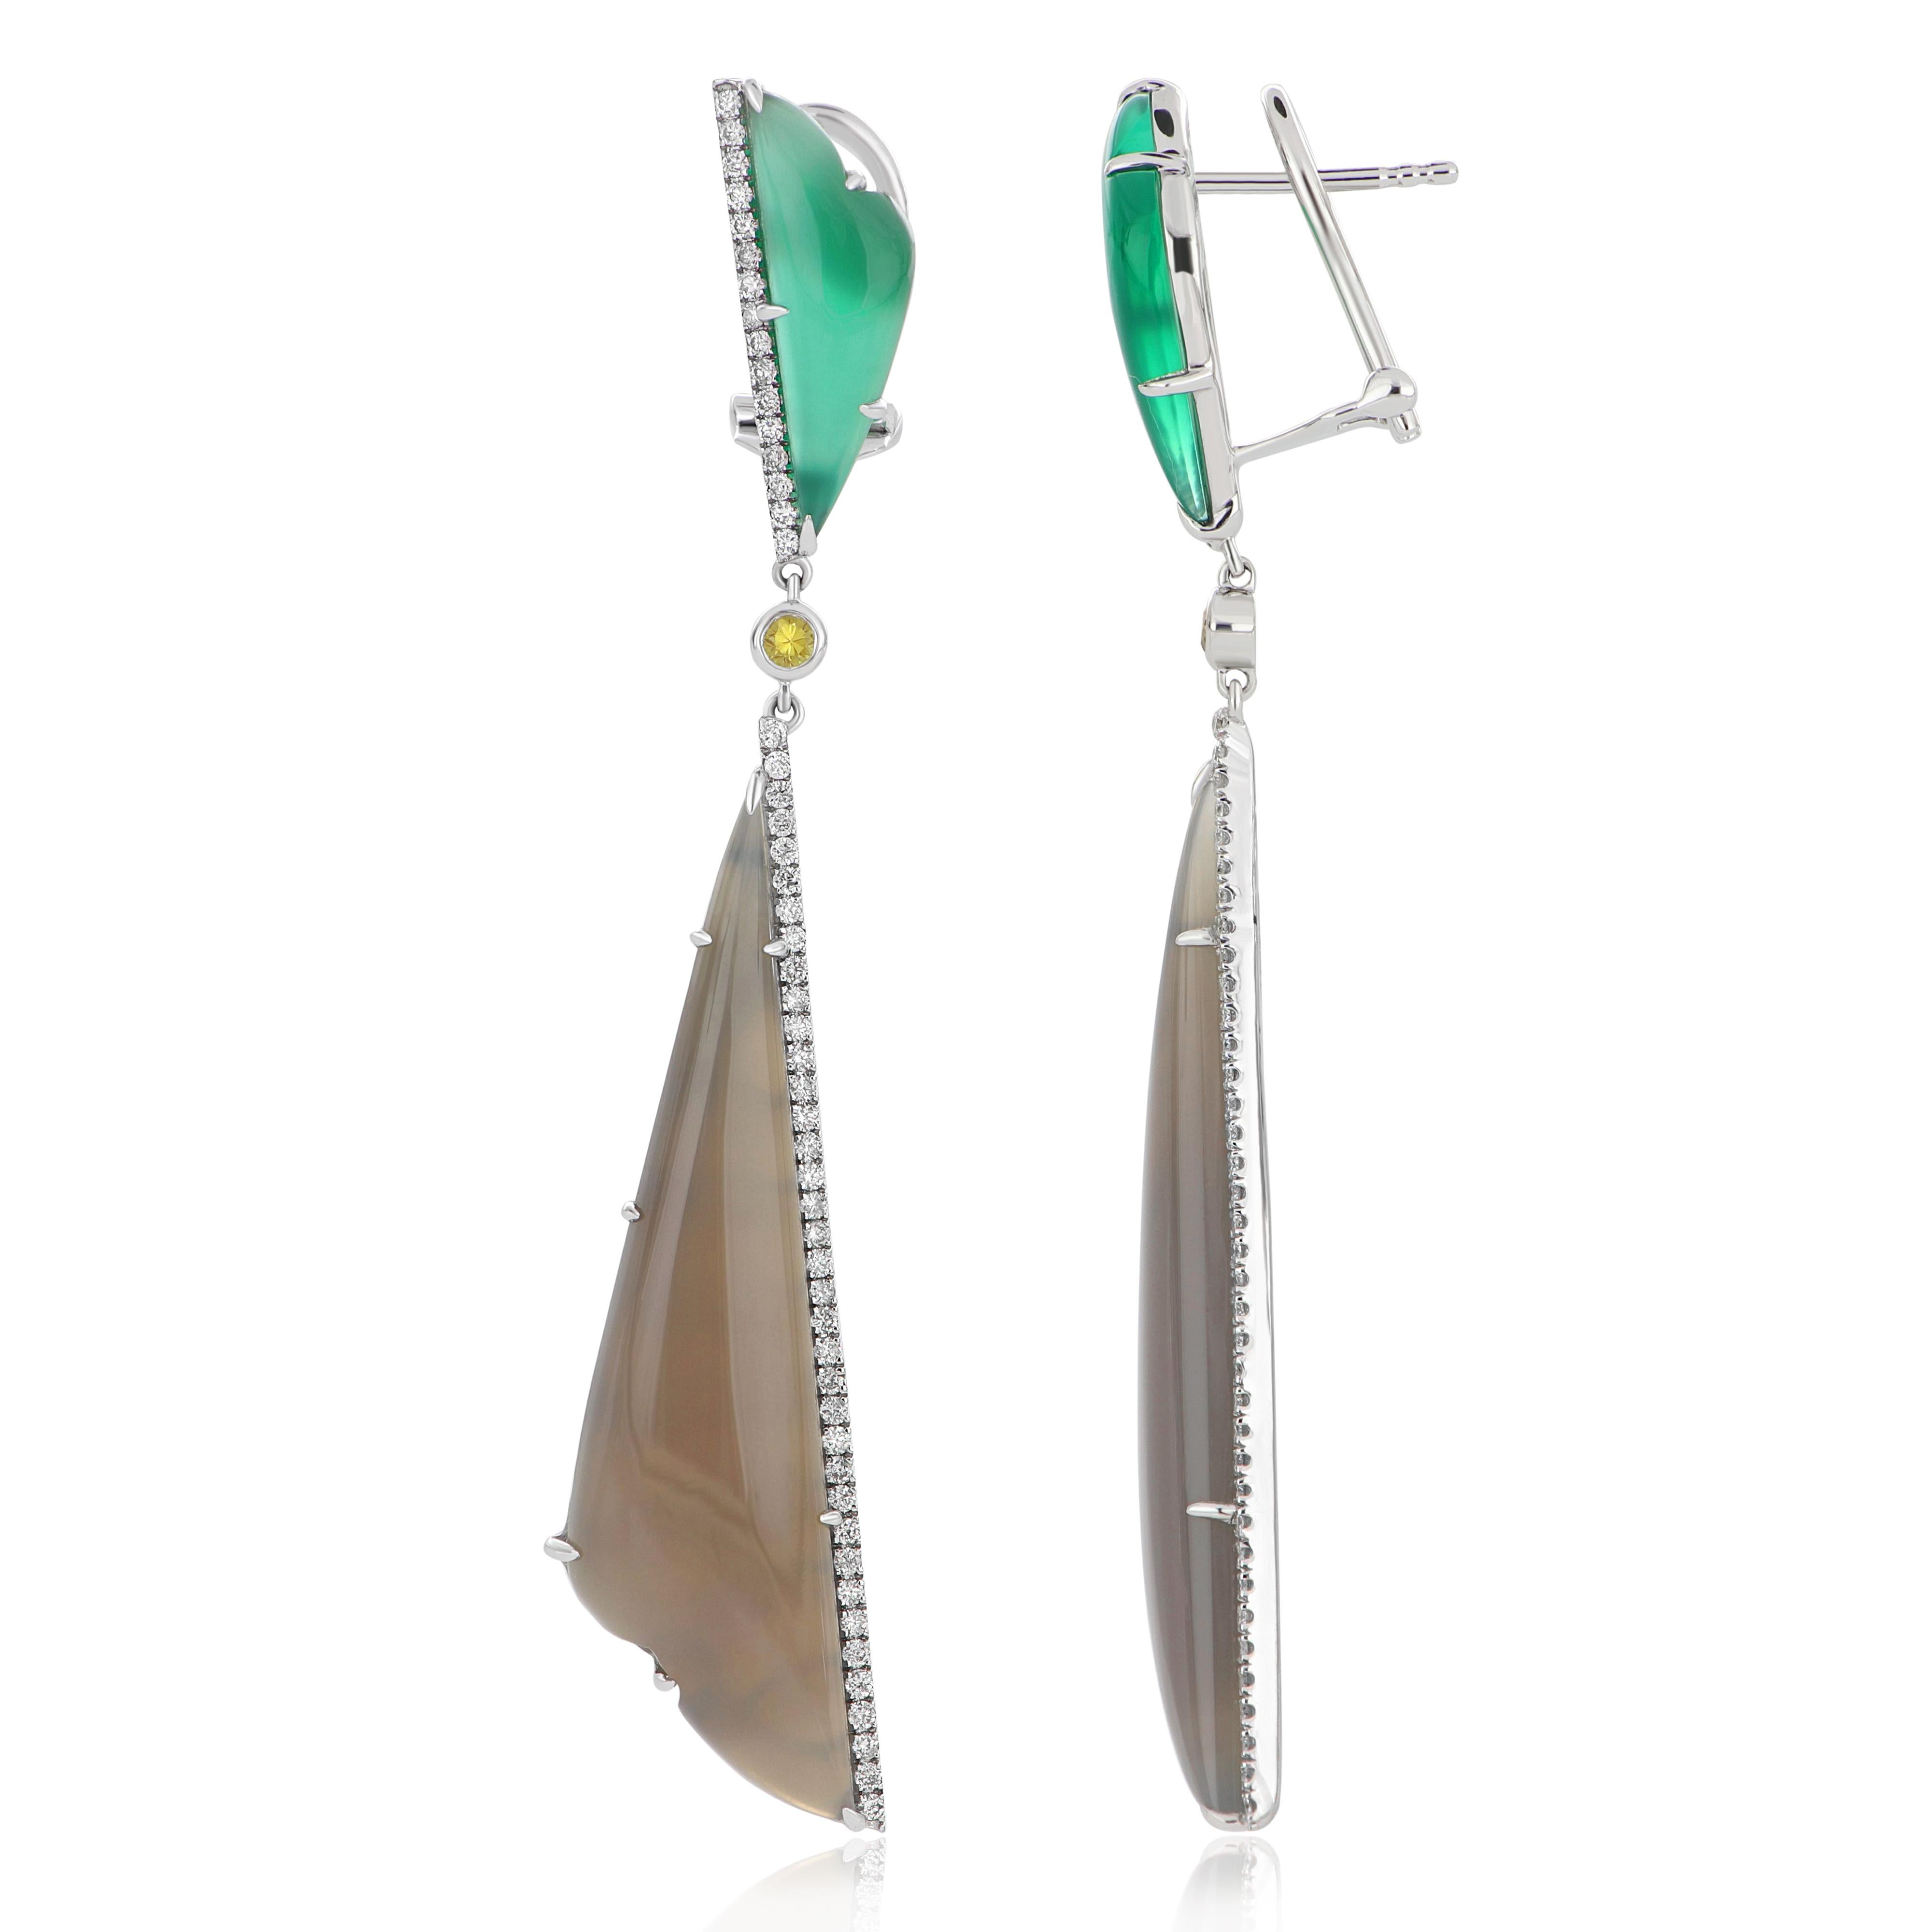 Elegant and exquisitely detailed 14 Karat White Gold Earrings, center set with 18.90 Cts. Cab Fancy Shape Grey Chalcedony and 3.8 Cts Green Onyx, accented with Yellow Sapphire and micro pave set Diamonds, weighing approx. 0.63 Cts.  Beautifully Hand